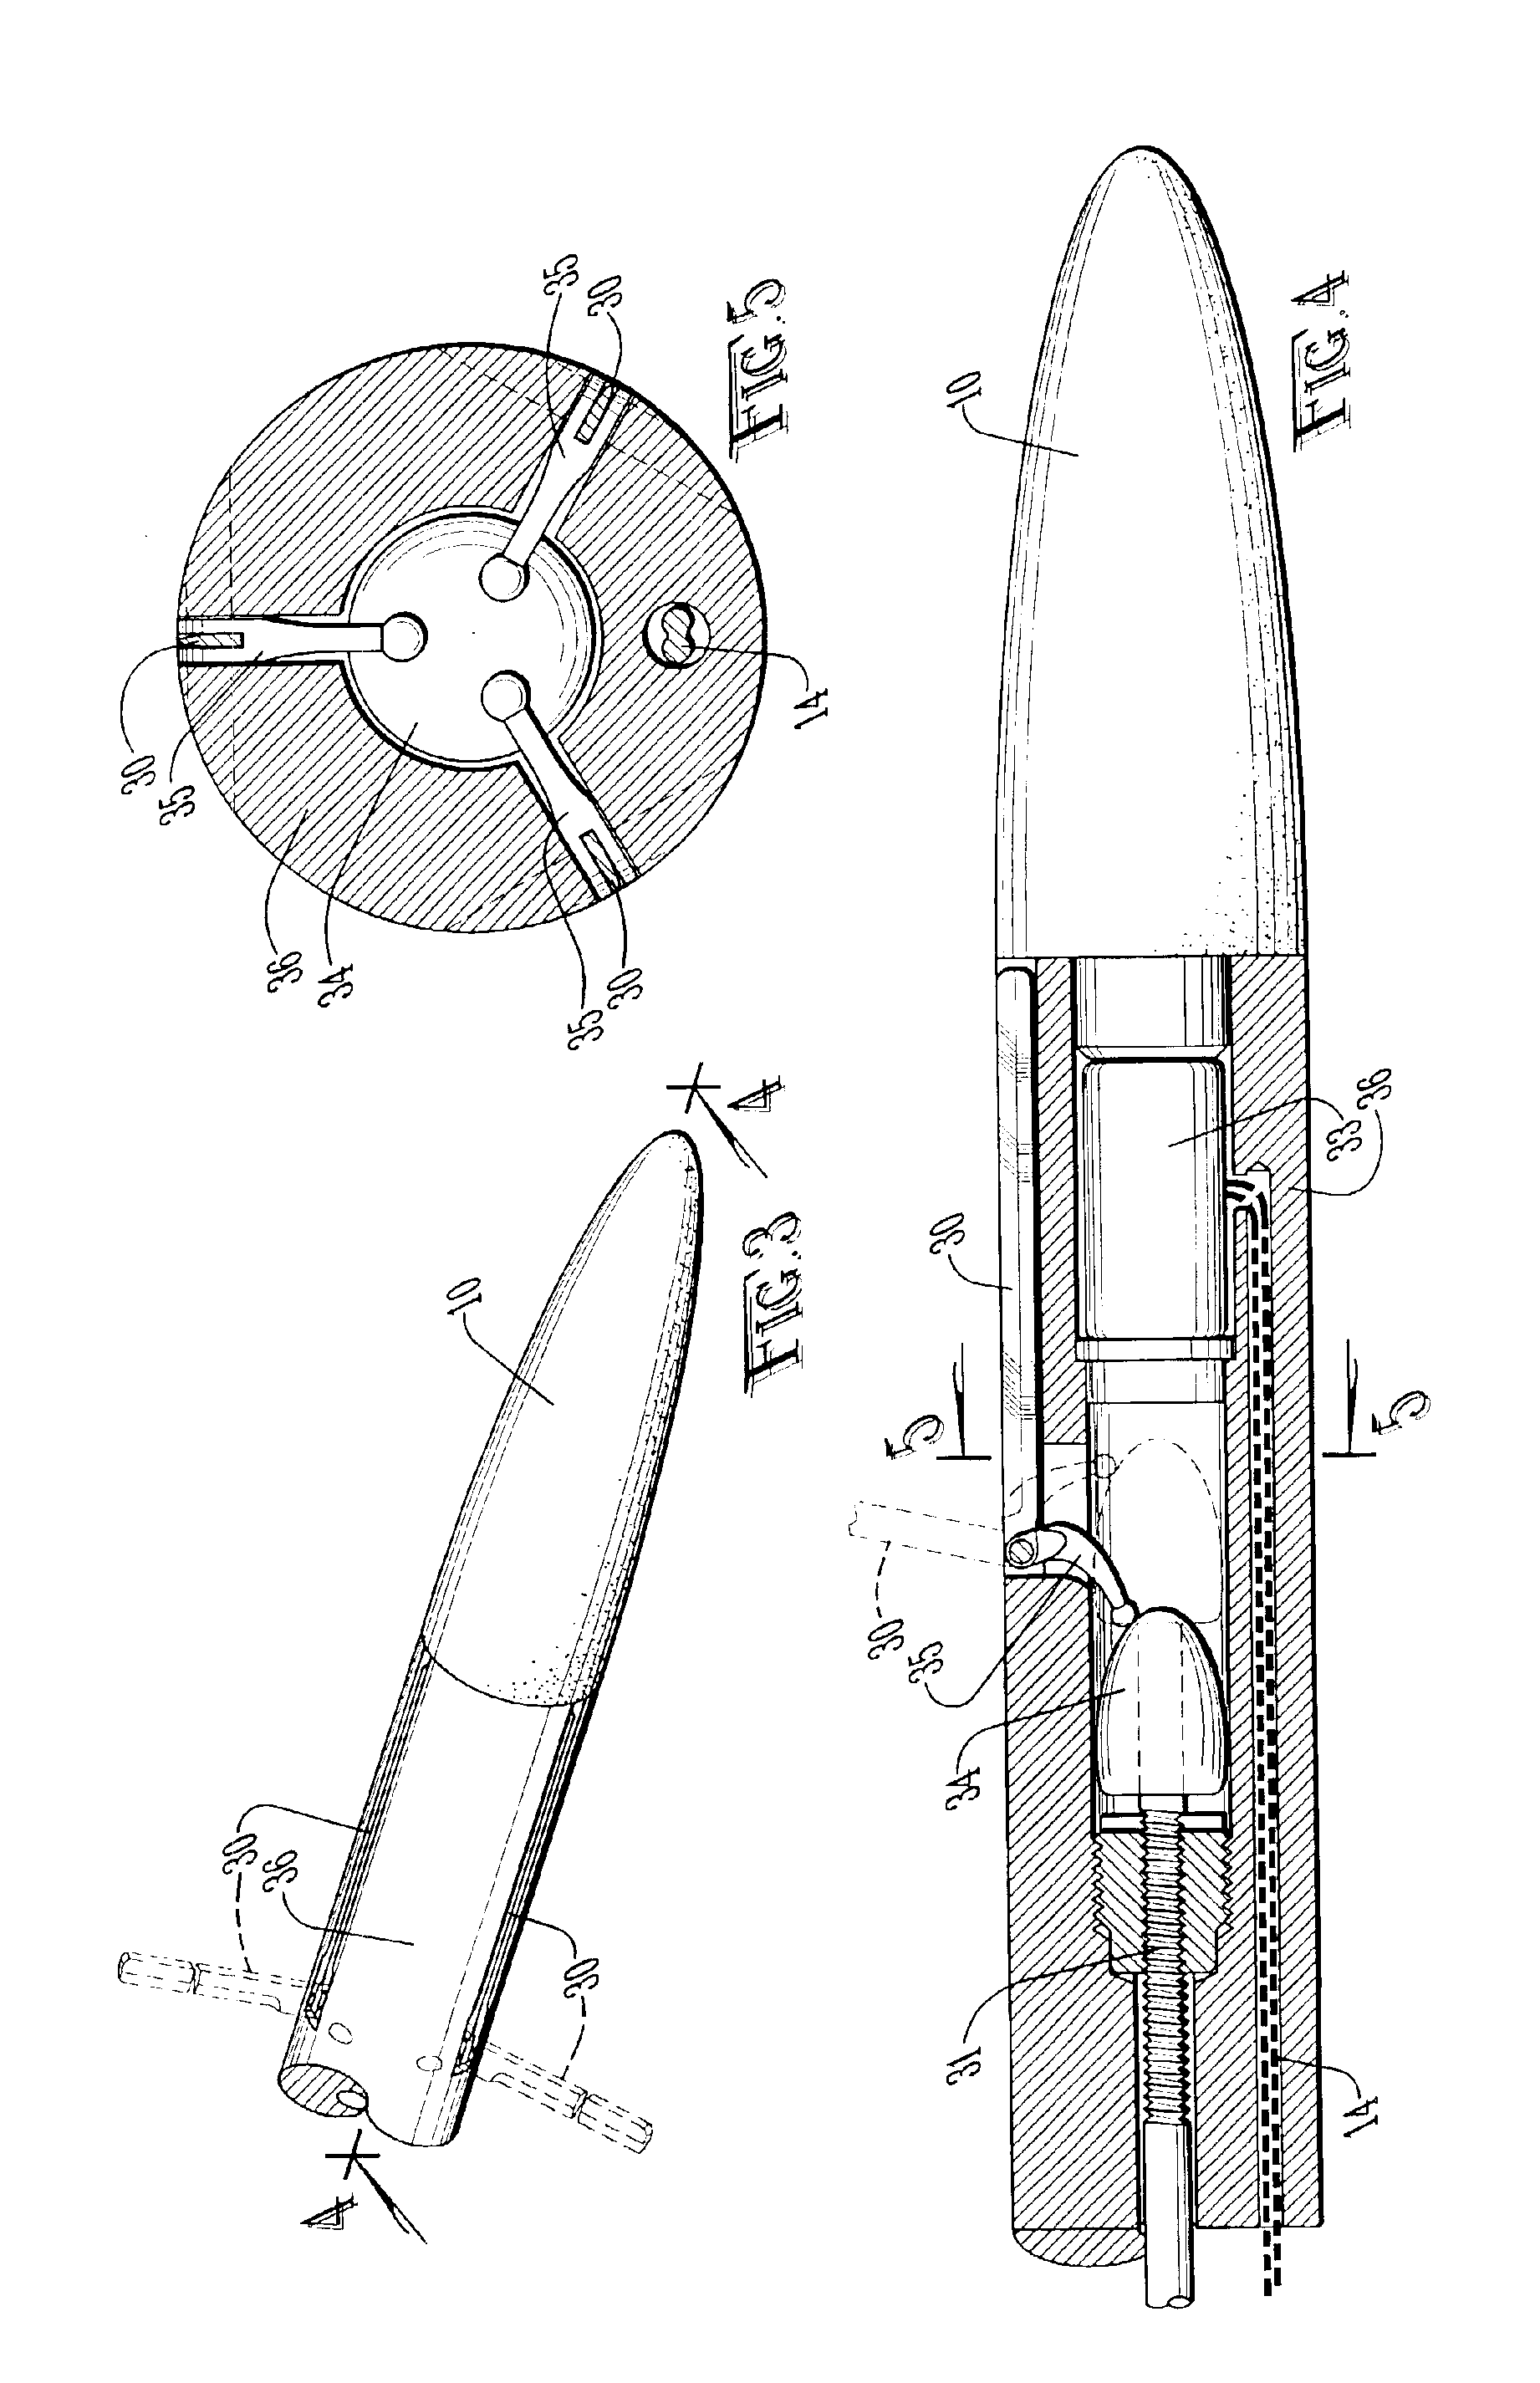 Conductive interstitial thermal therapy device